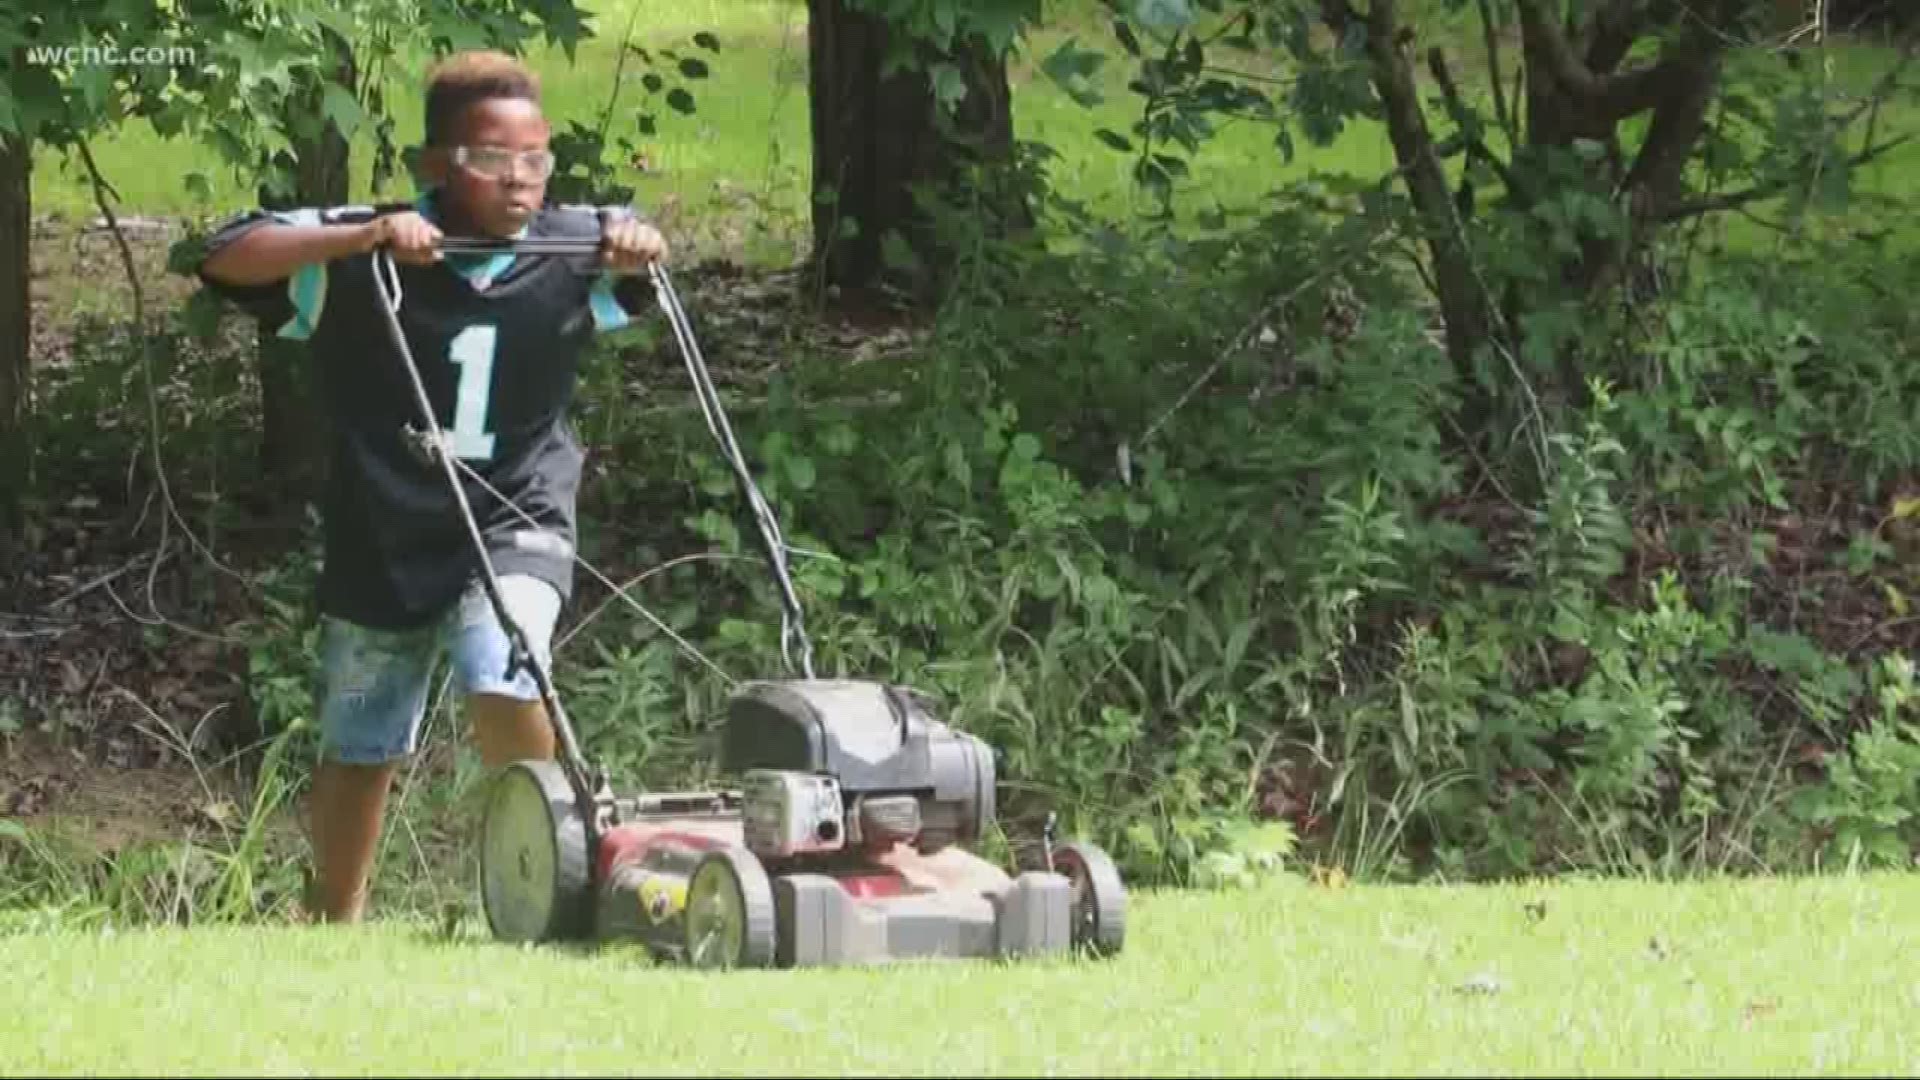 While most kids are playing video games or watching TV with friends this summer, 12-year-old Jaylin is working hard to save money for his own college education.